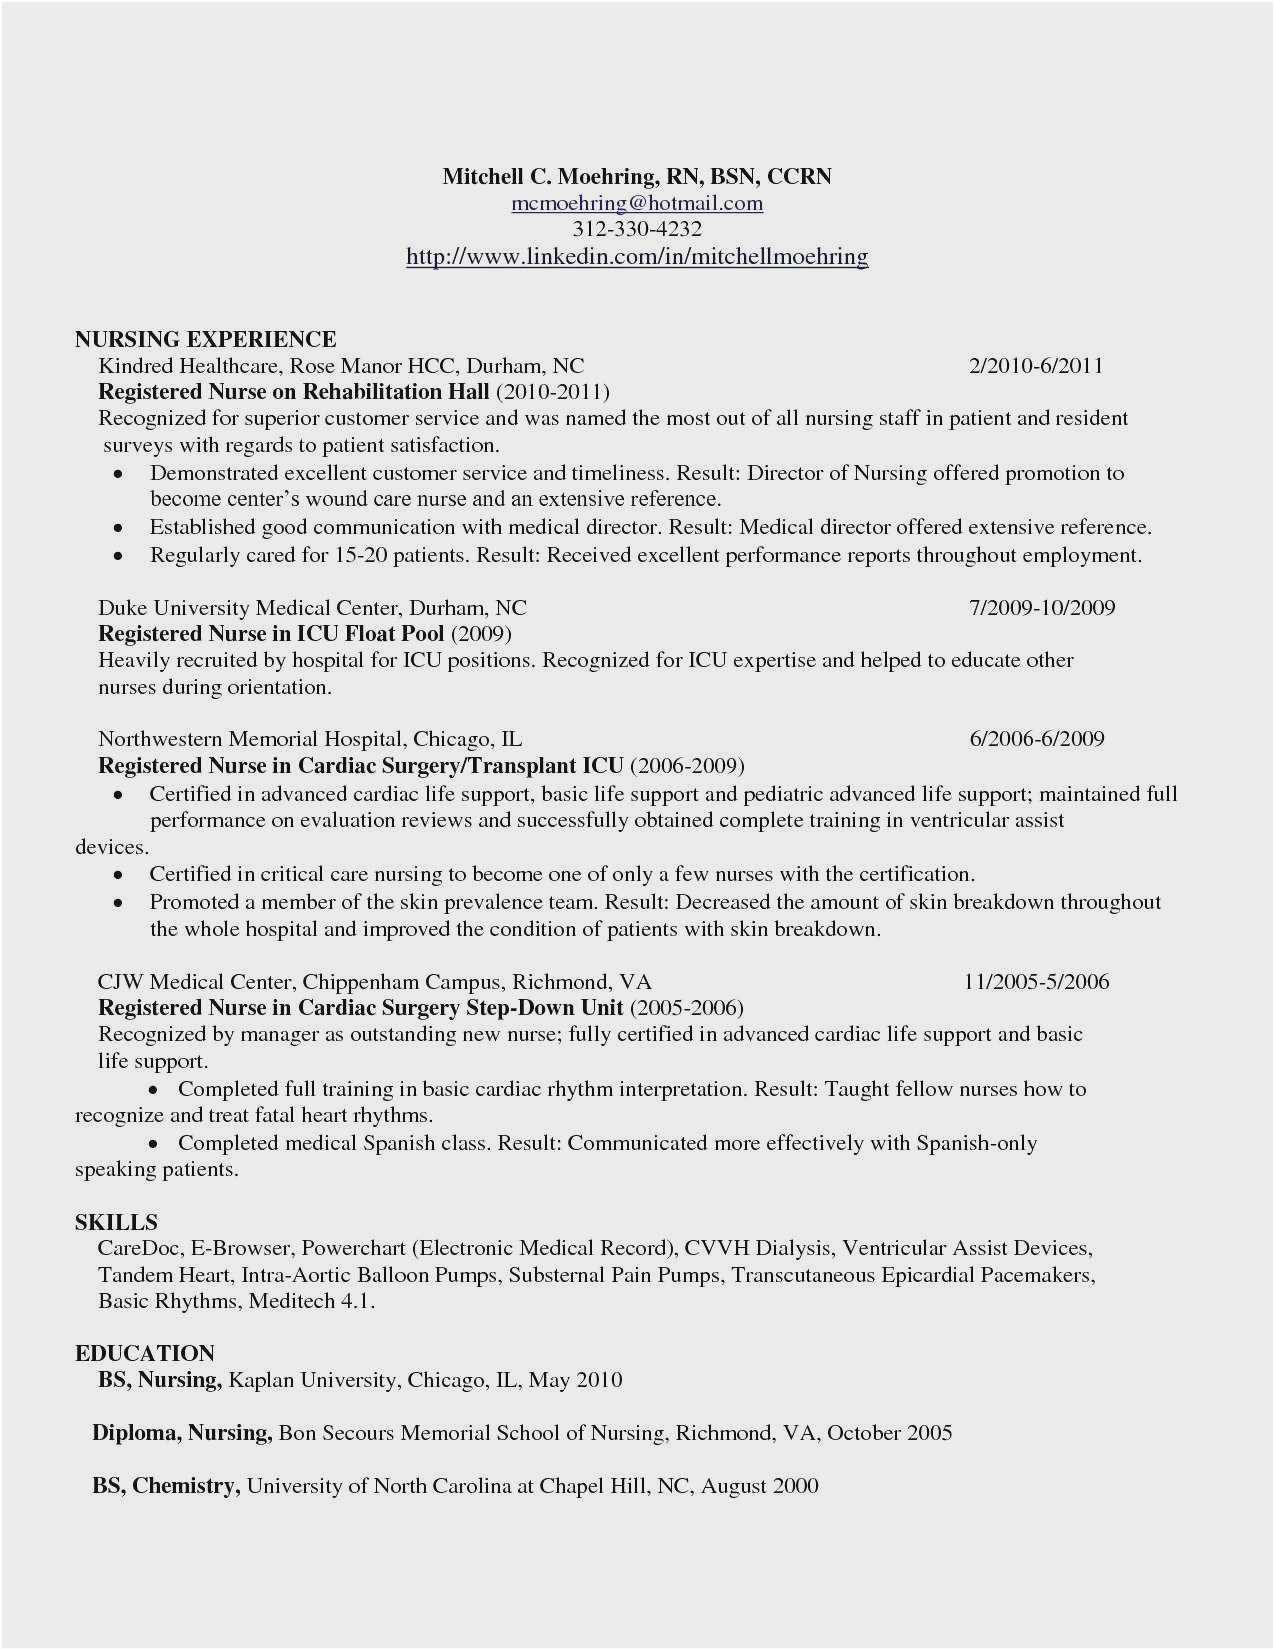 resume with no experience